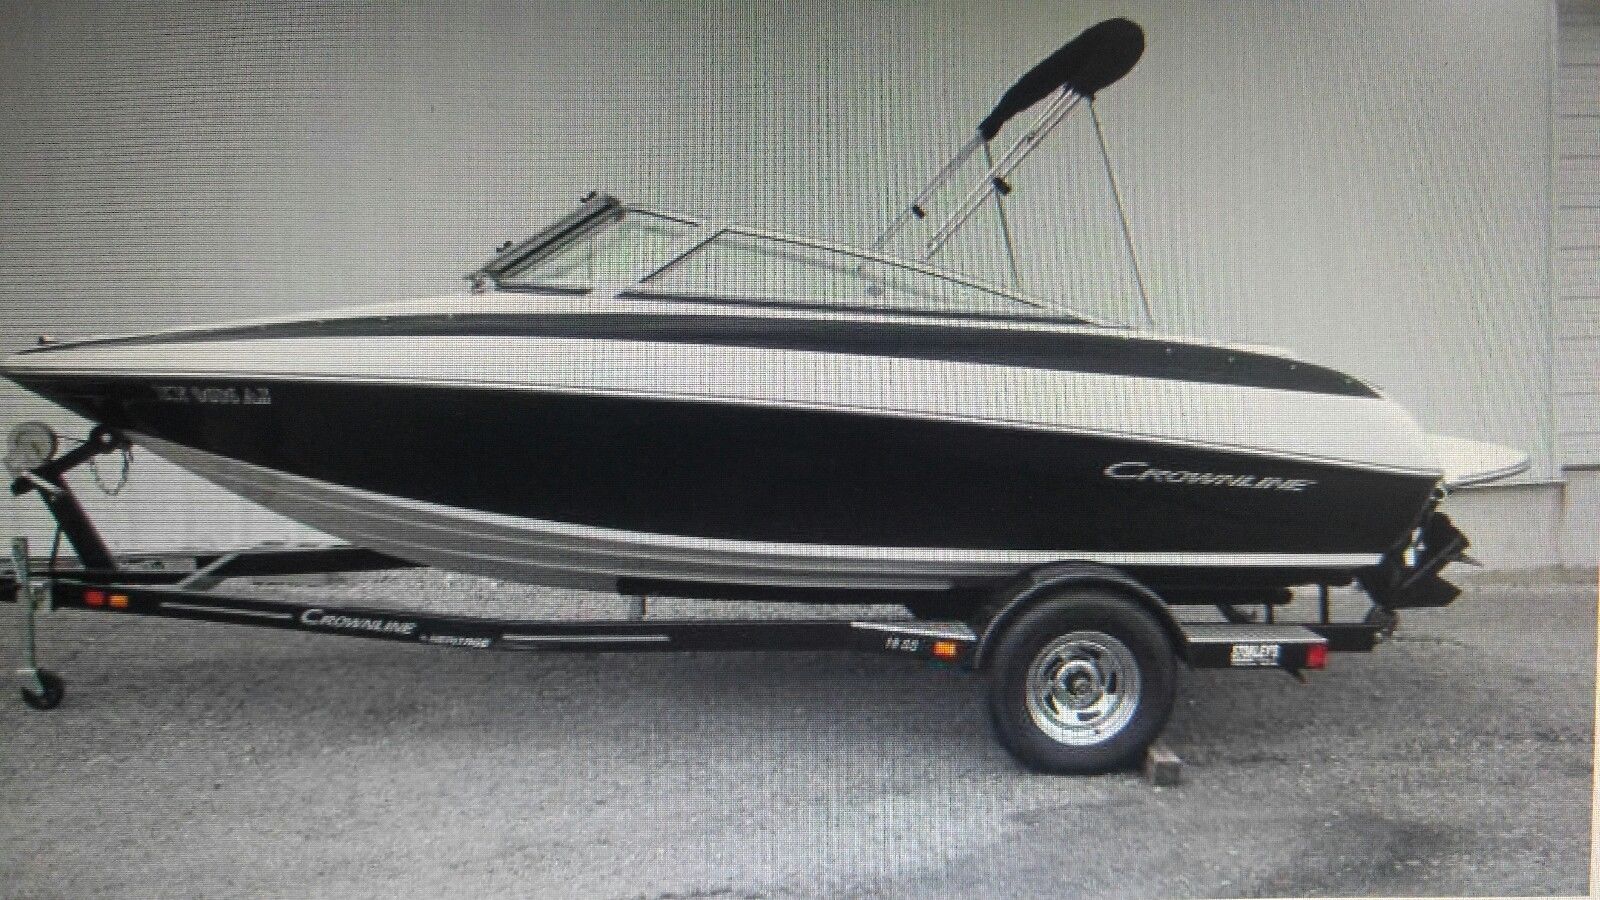 Crownline 18SS 2015 for sale for $24,500 - Boats-from-USA.com